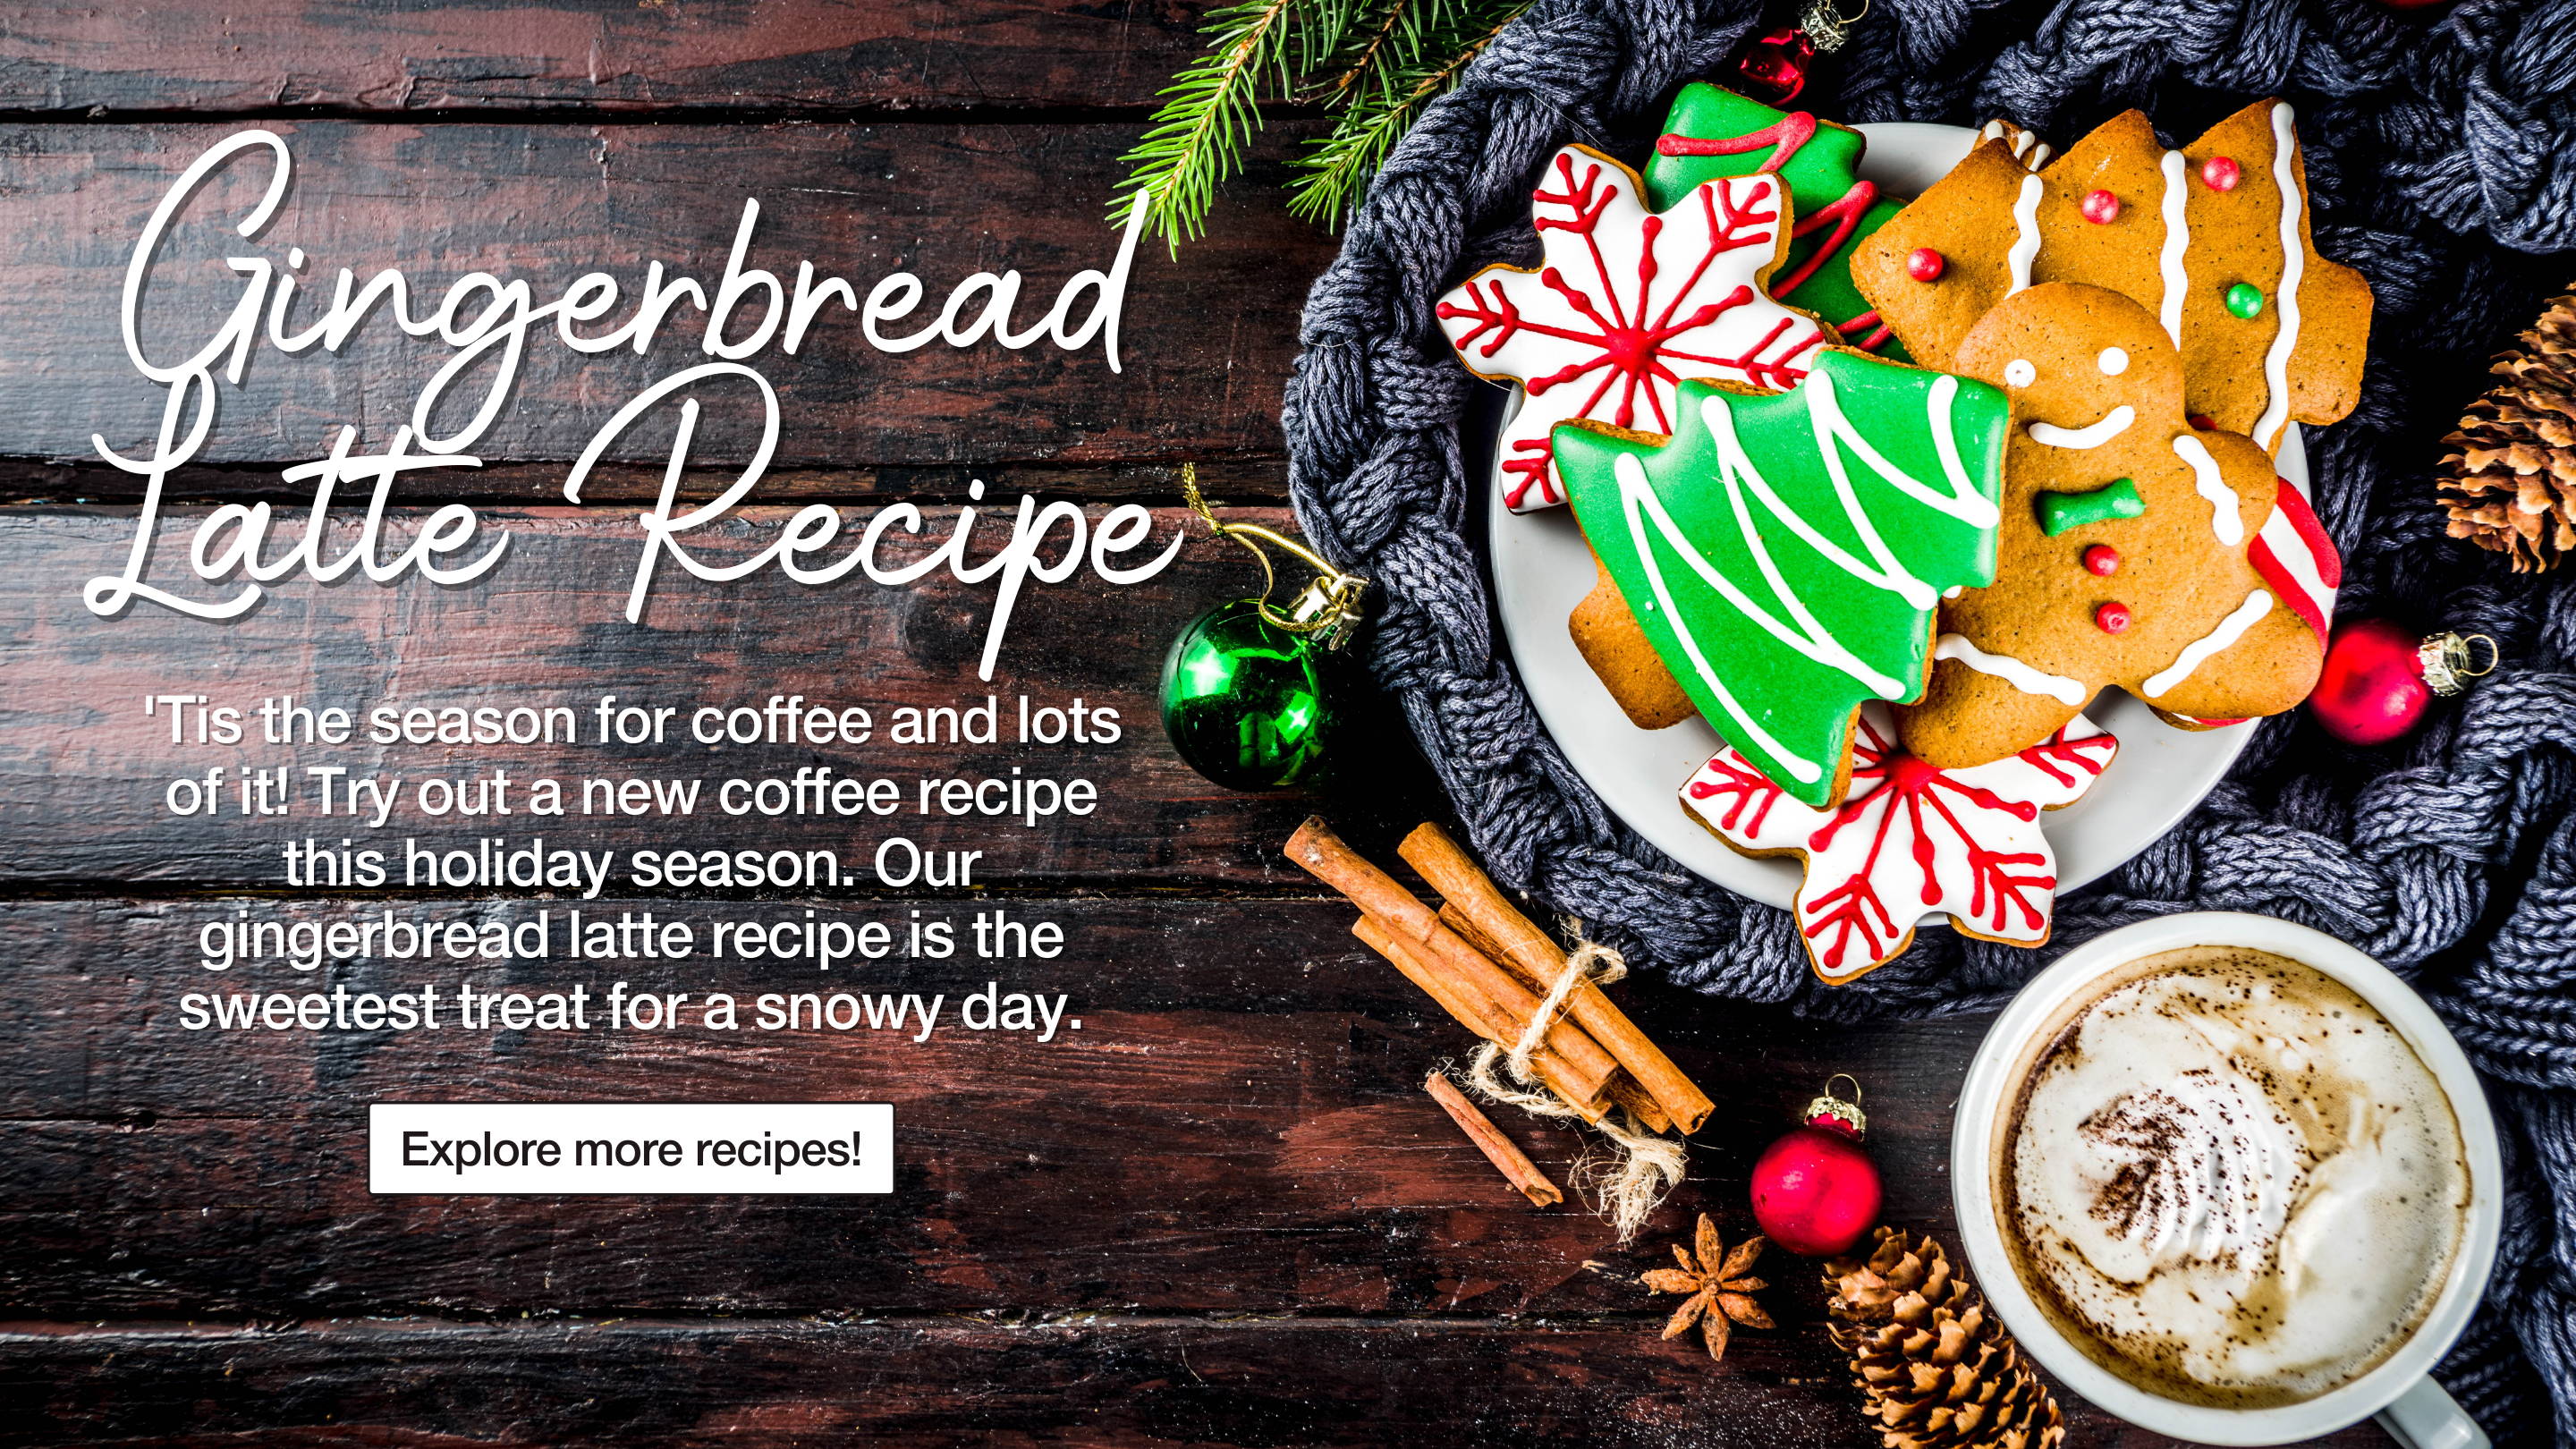 Try our gingerbread latte recipe this holiday season!